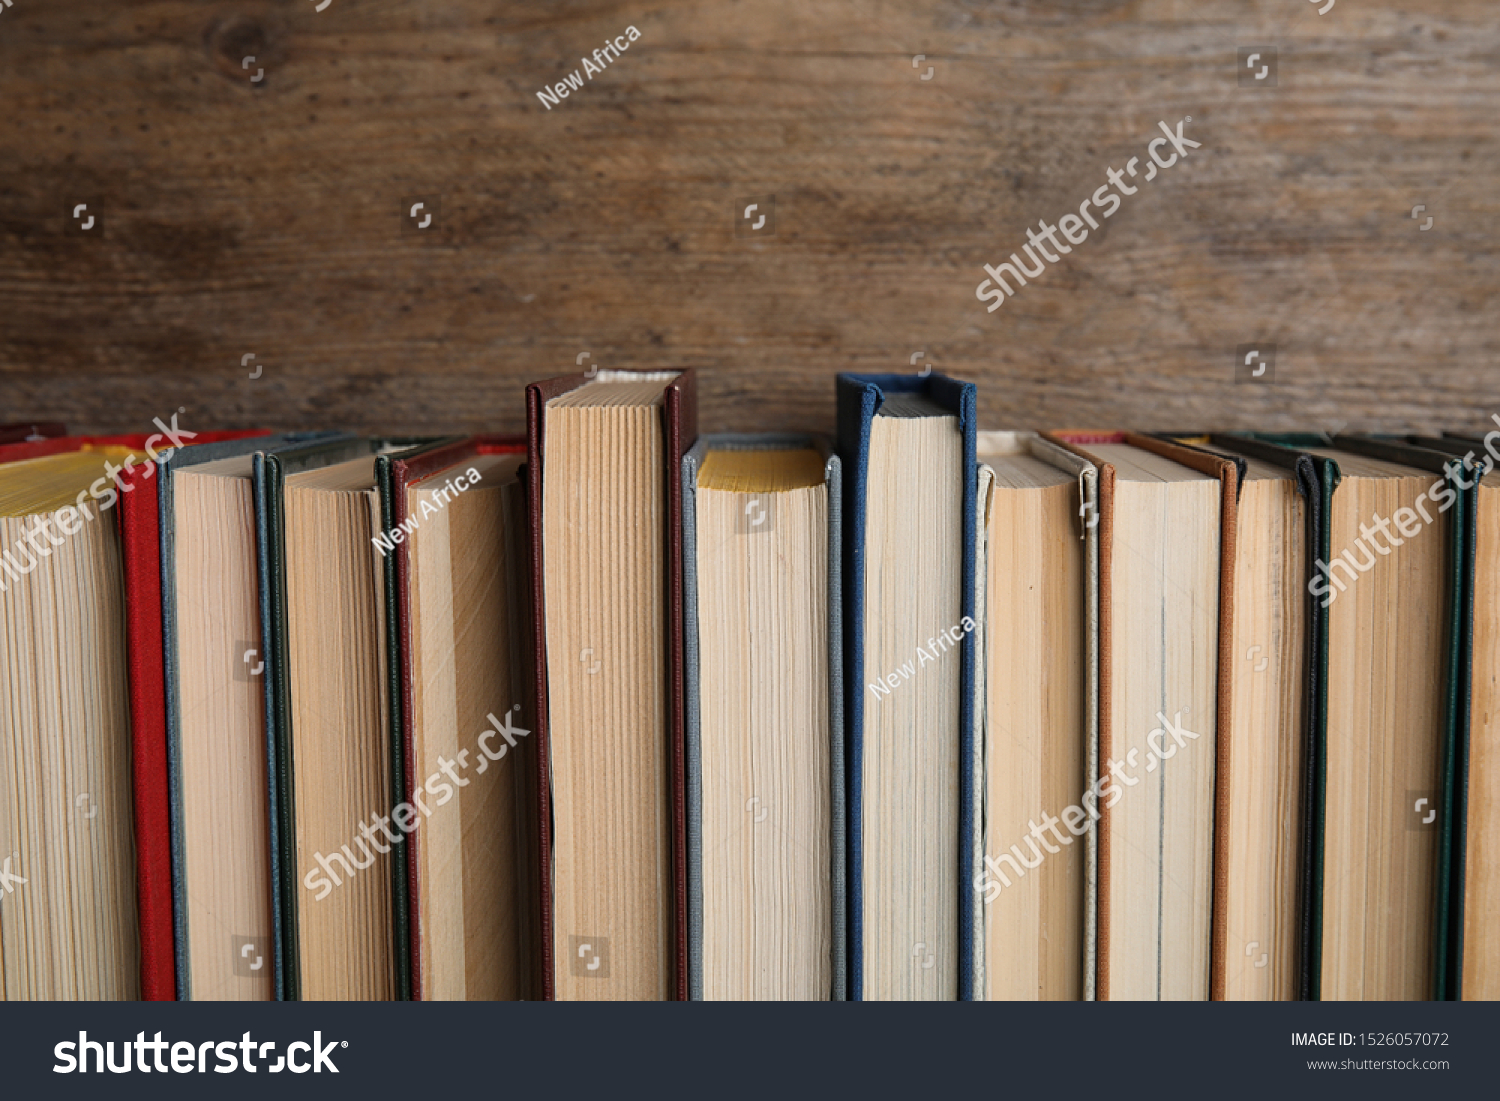 Stack of hardcover books on wooden background #1526057072